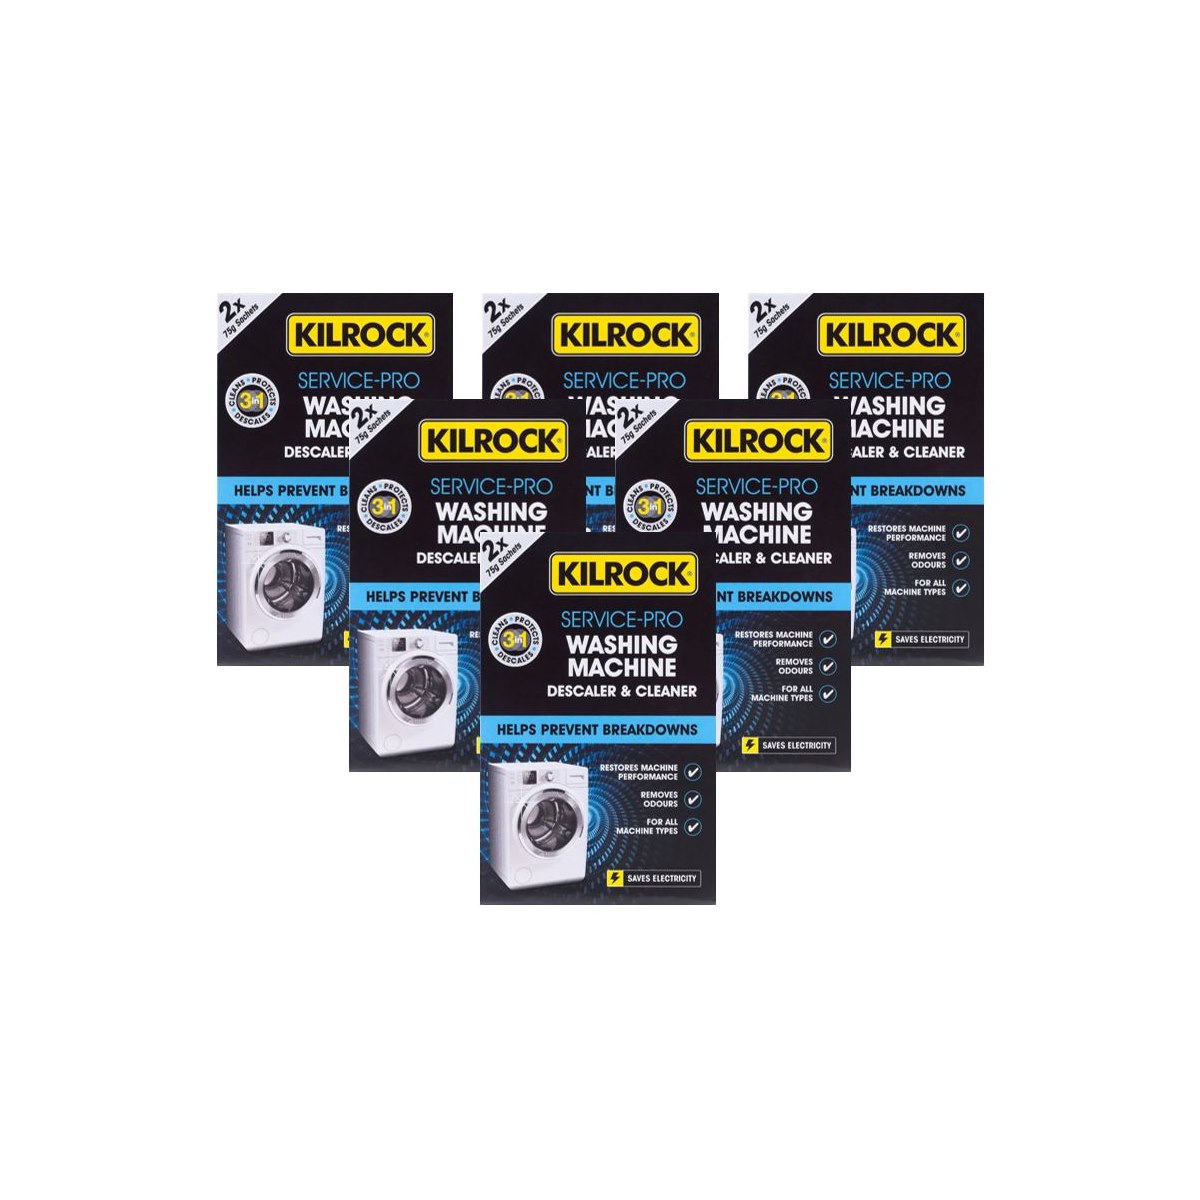 Case of 6 x Kilrock Service Pro Washing Machine Descaler and Cleaner 2 x 75g Sachets